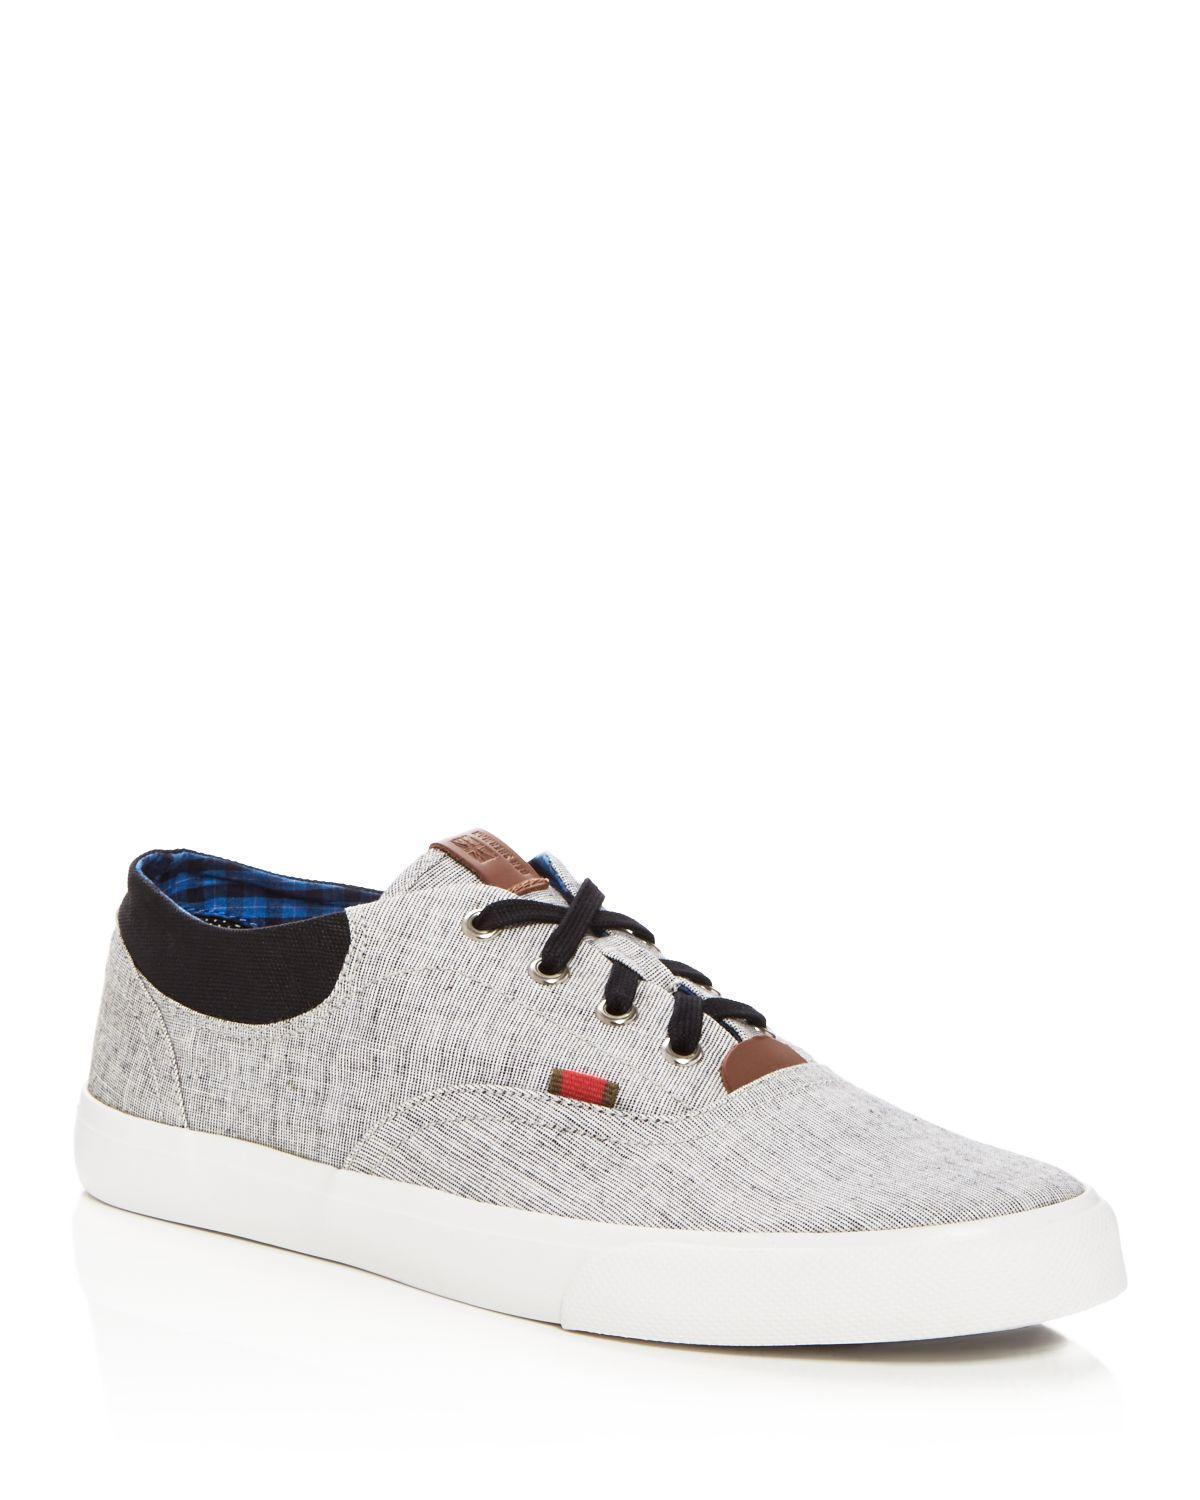 Ben sherman Canvas Sneakers - Compare At $85 in Black for Men | Lyst